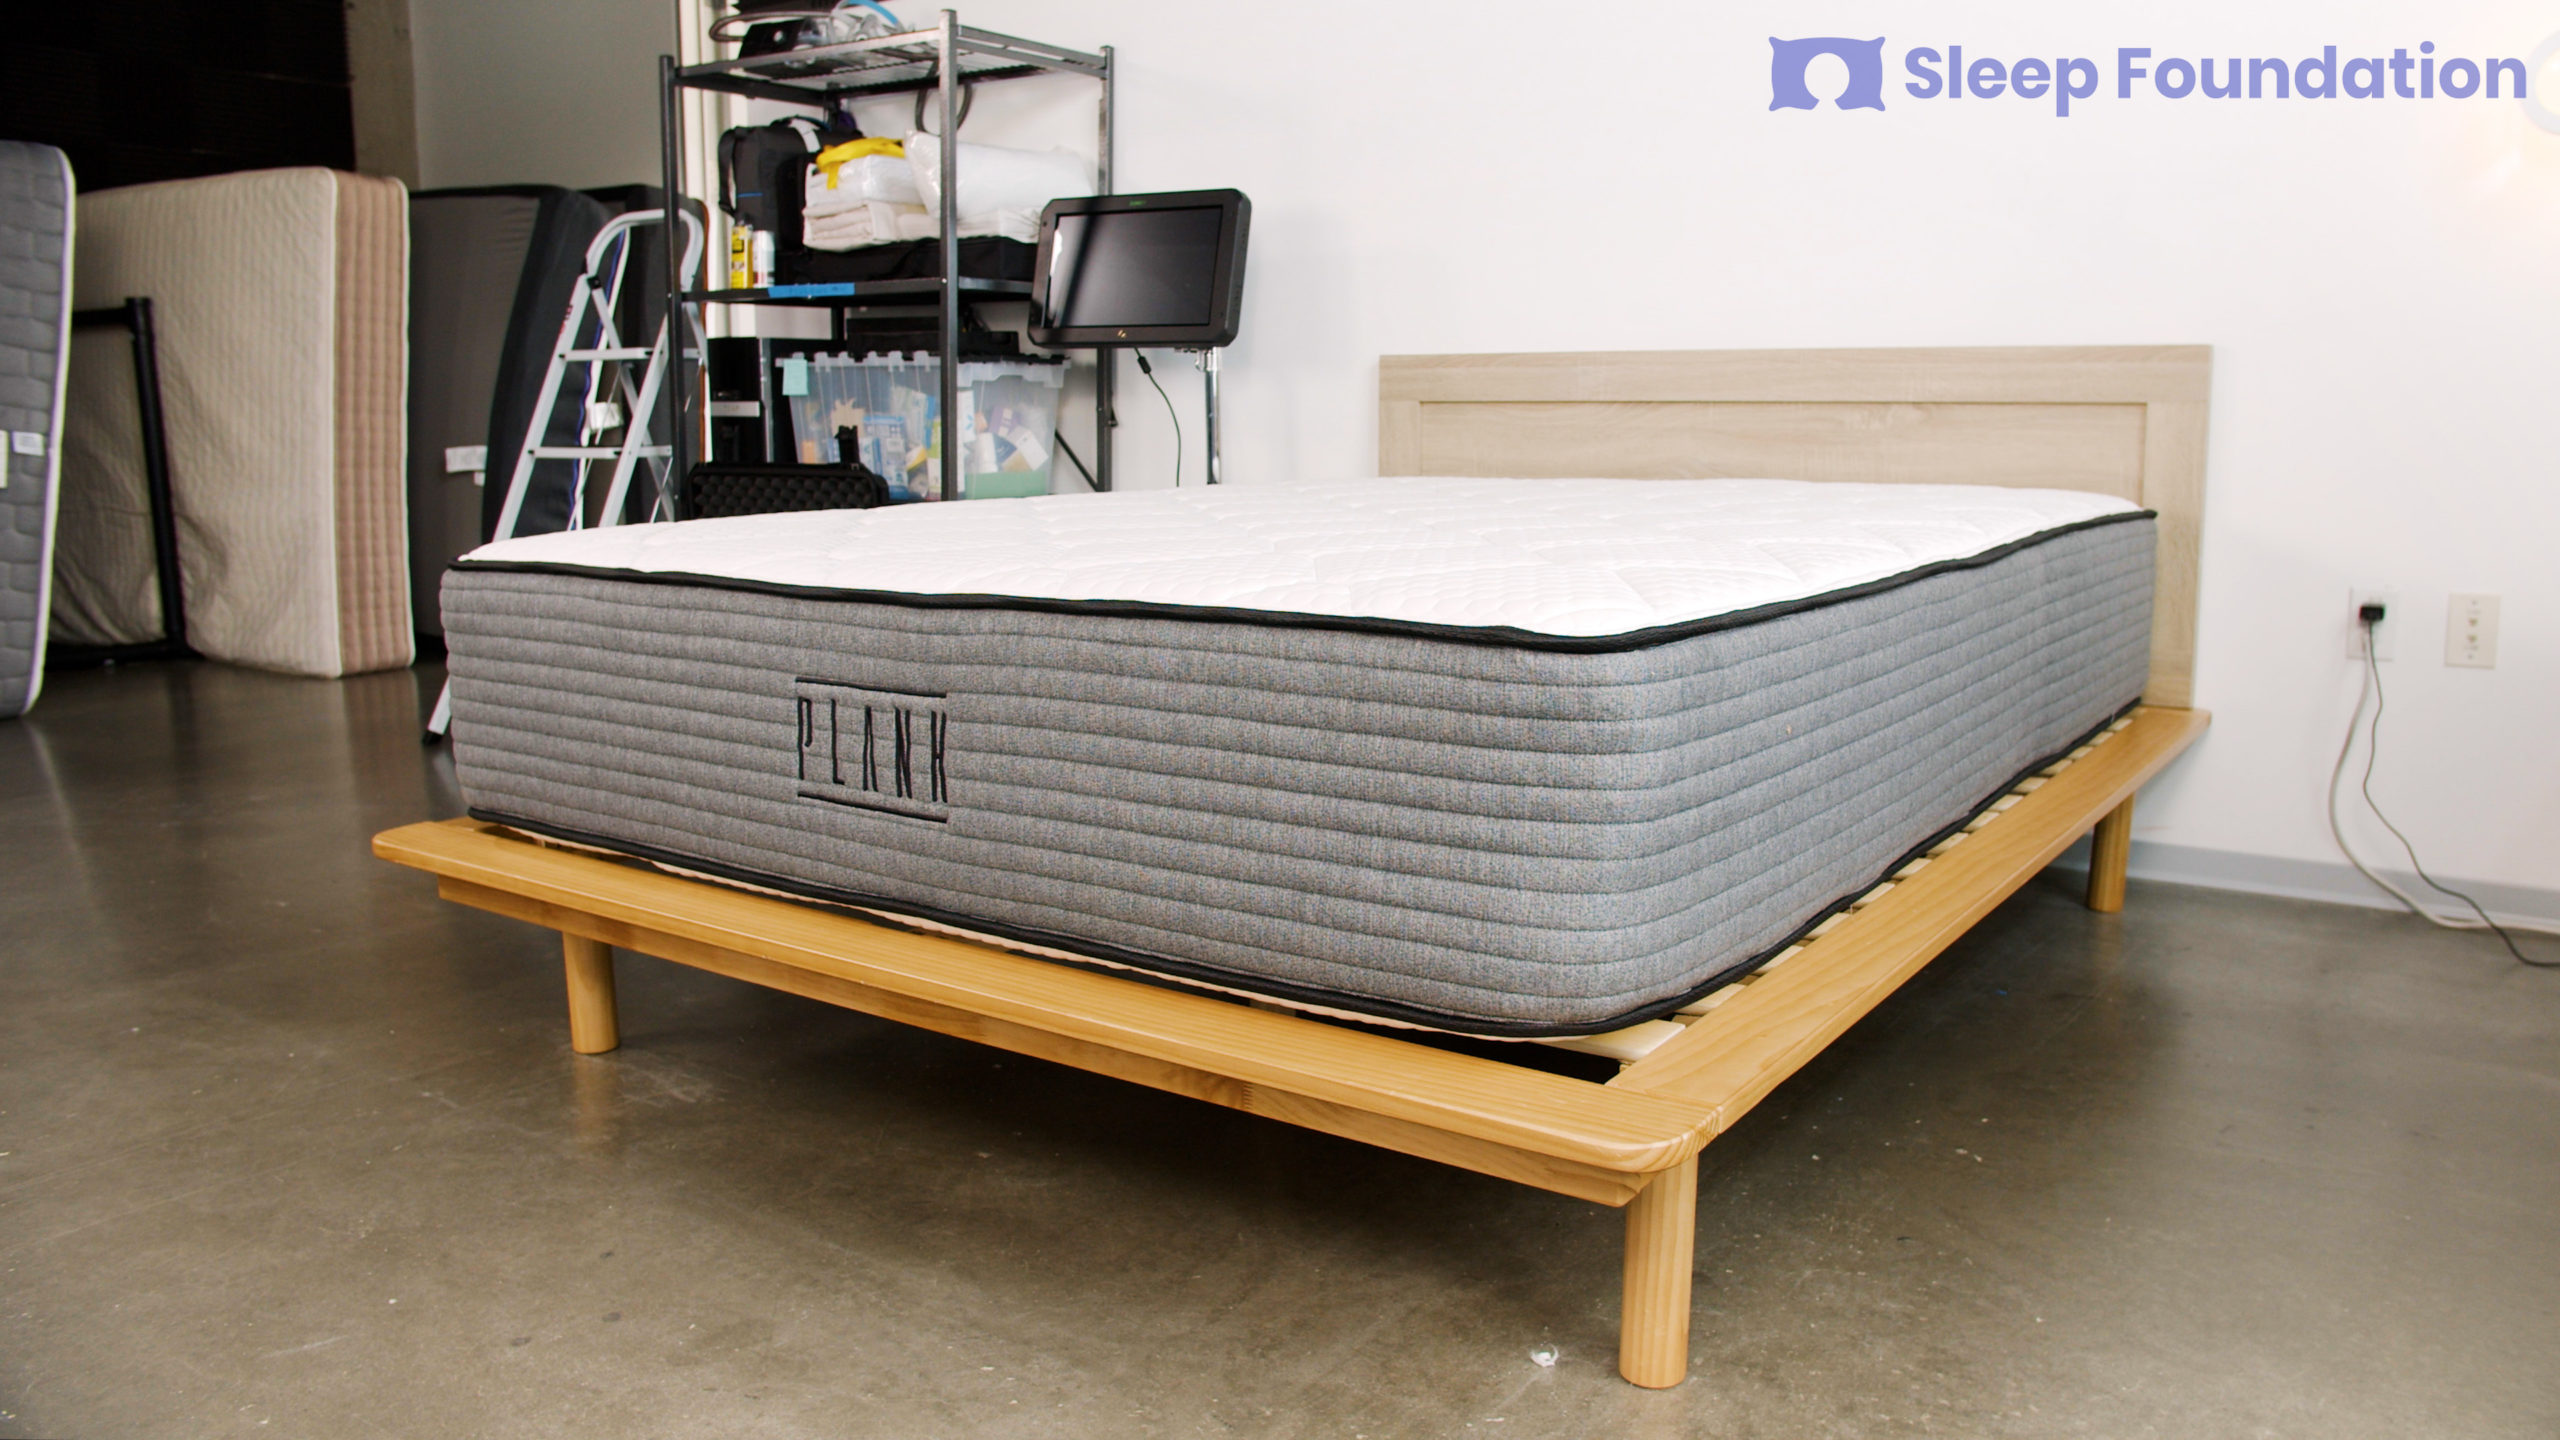 A picture of the Plank Firm Luxe Mattress in Sleep Foundation's test lab.